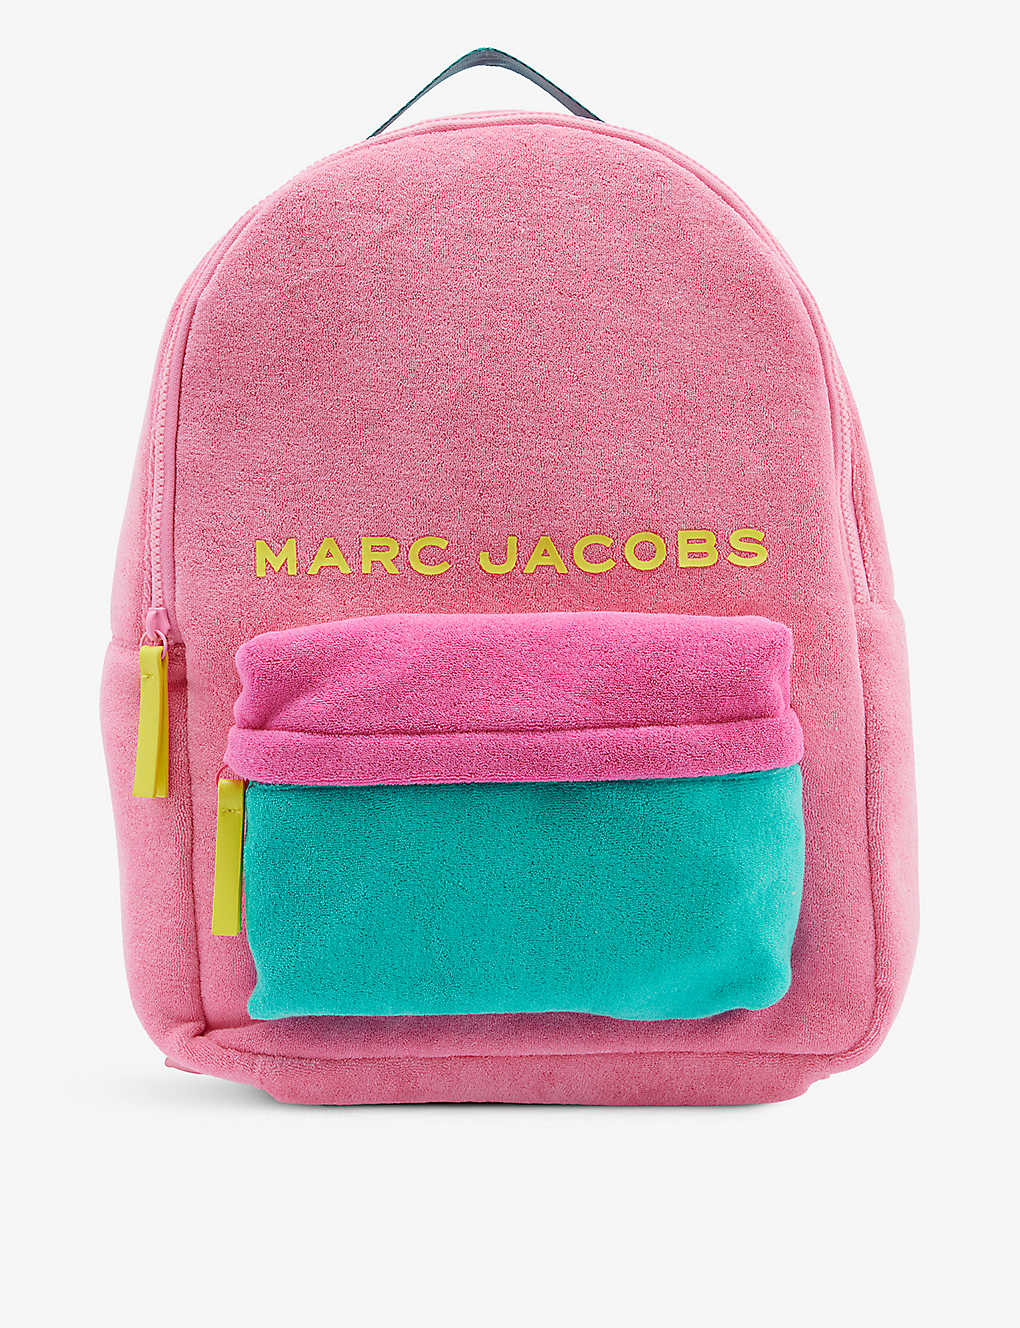 MARC JACOBS MARC JACOBS GIRLS MULTICOLOURED KIDS LOGO-PRINT COTTON BACKPACK,63583268